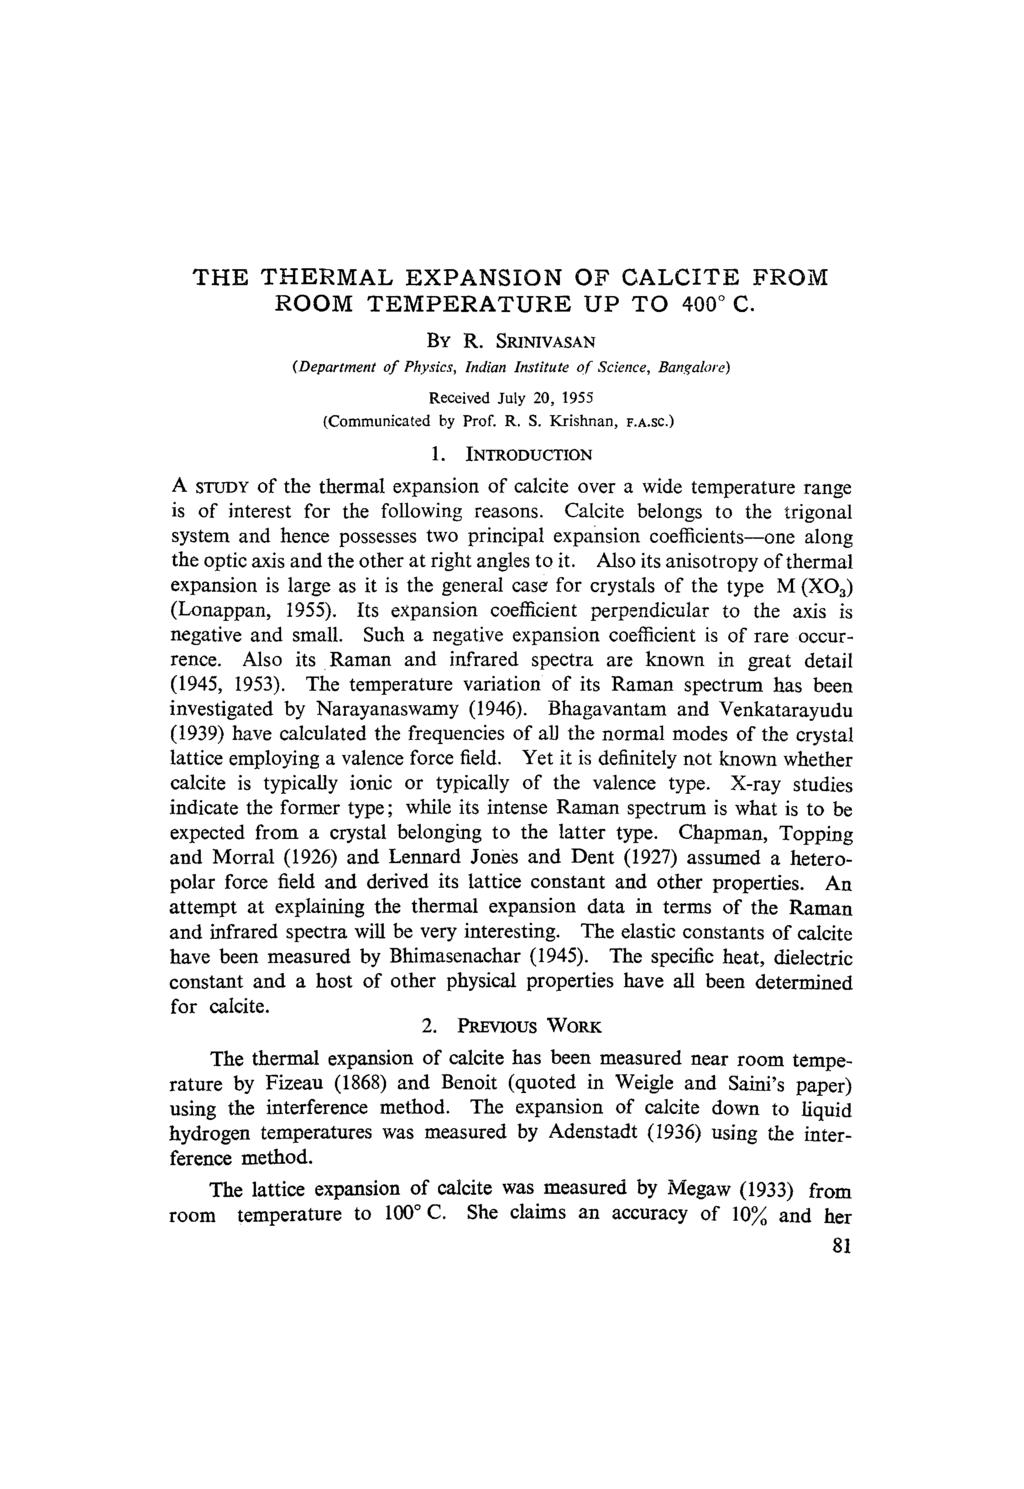 THE THERMAL EXPANSION OF CALCITE FROM ROOM TEMPERATURE UP TO 400 ~ C. BY R. SRINIVASAN (Department of Physics, Indian Institute of Science, Bangalore) Received July 20, 1955 (Communicated by Prof. R. S. Krishnan, F.